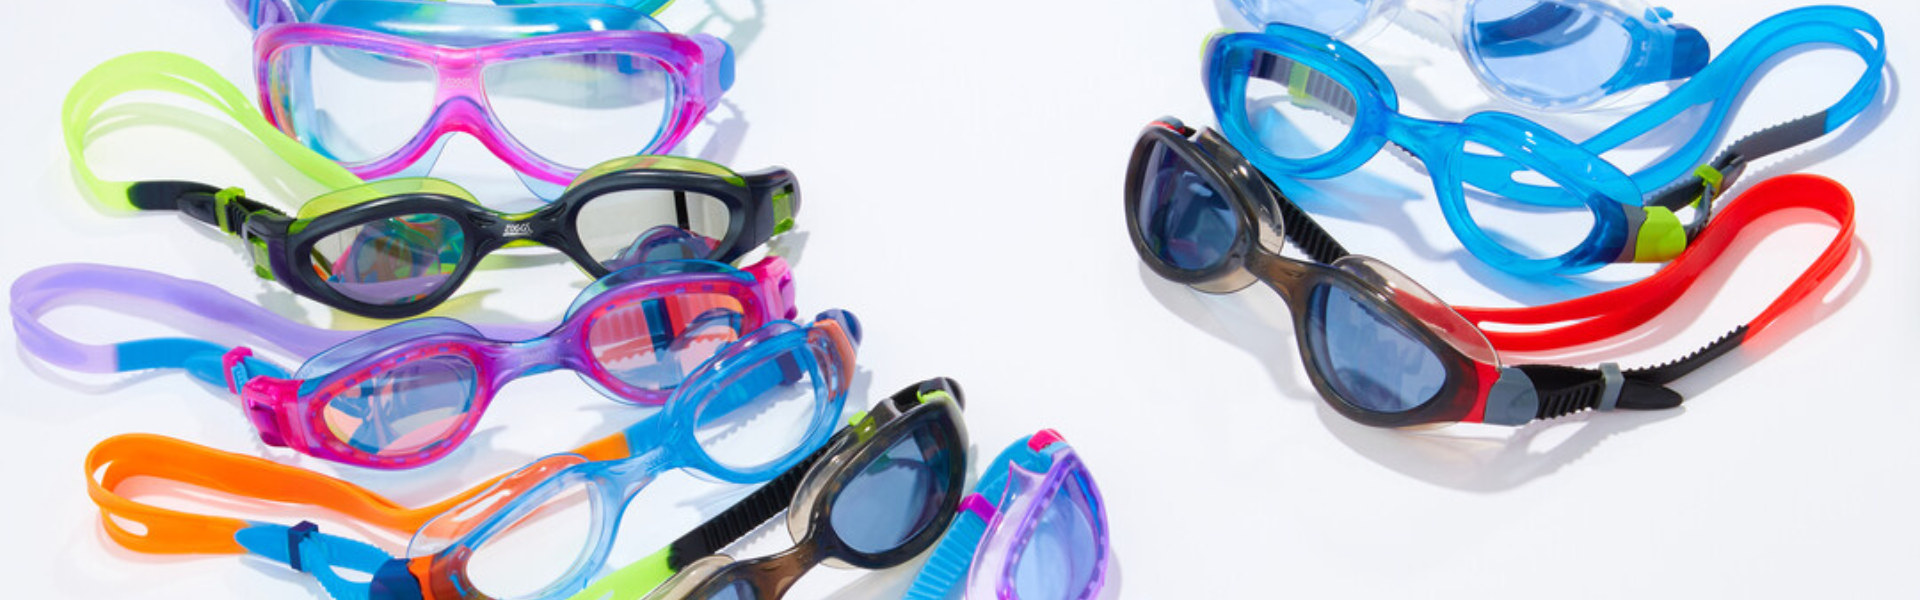 mirrored and colour tinted goggles for the whole family